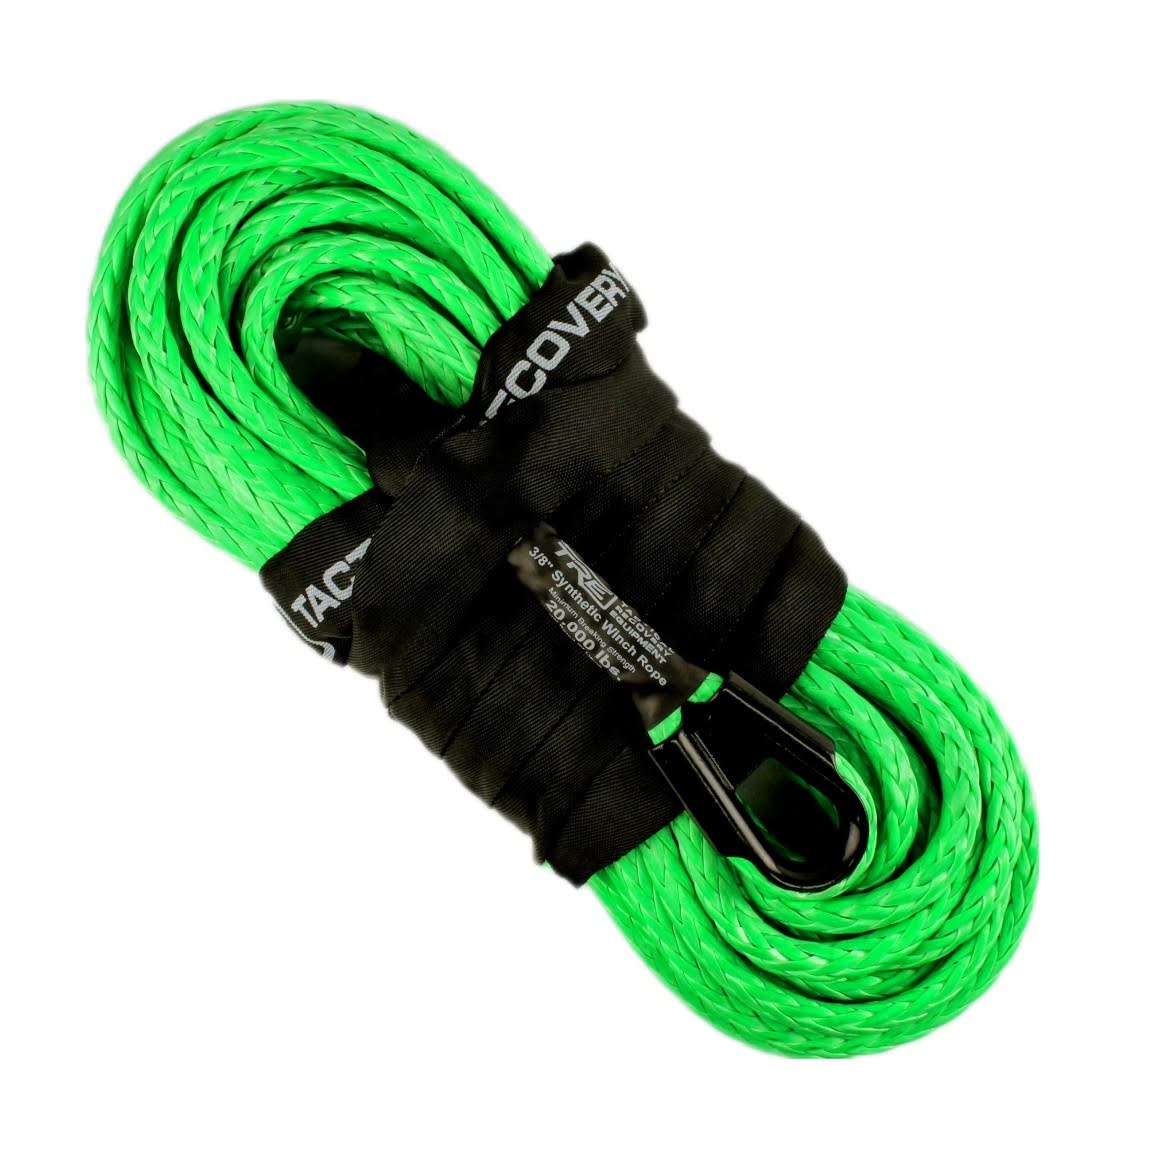 3/8 Synthetic Winch Rope - 20,000 lb. Breaking Strength - Replacement Winch Rope for 6,000 - 12,000 lb. Winches (Winch Rope Color: Lime Green, Winch R